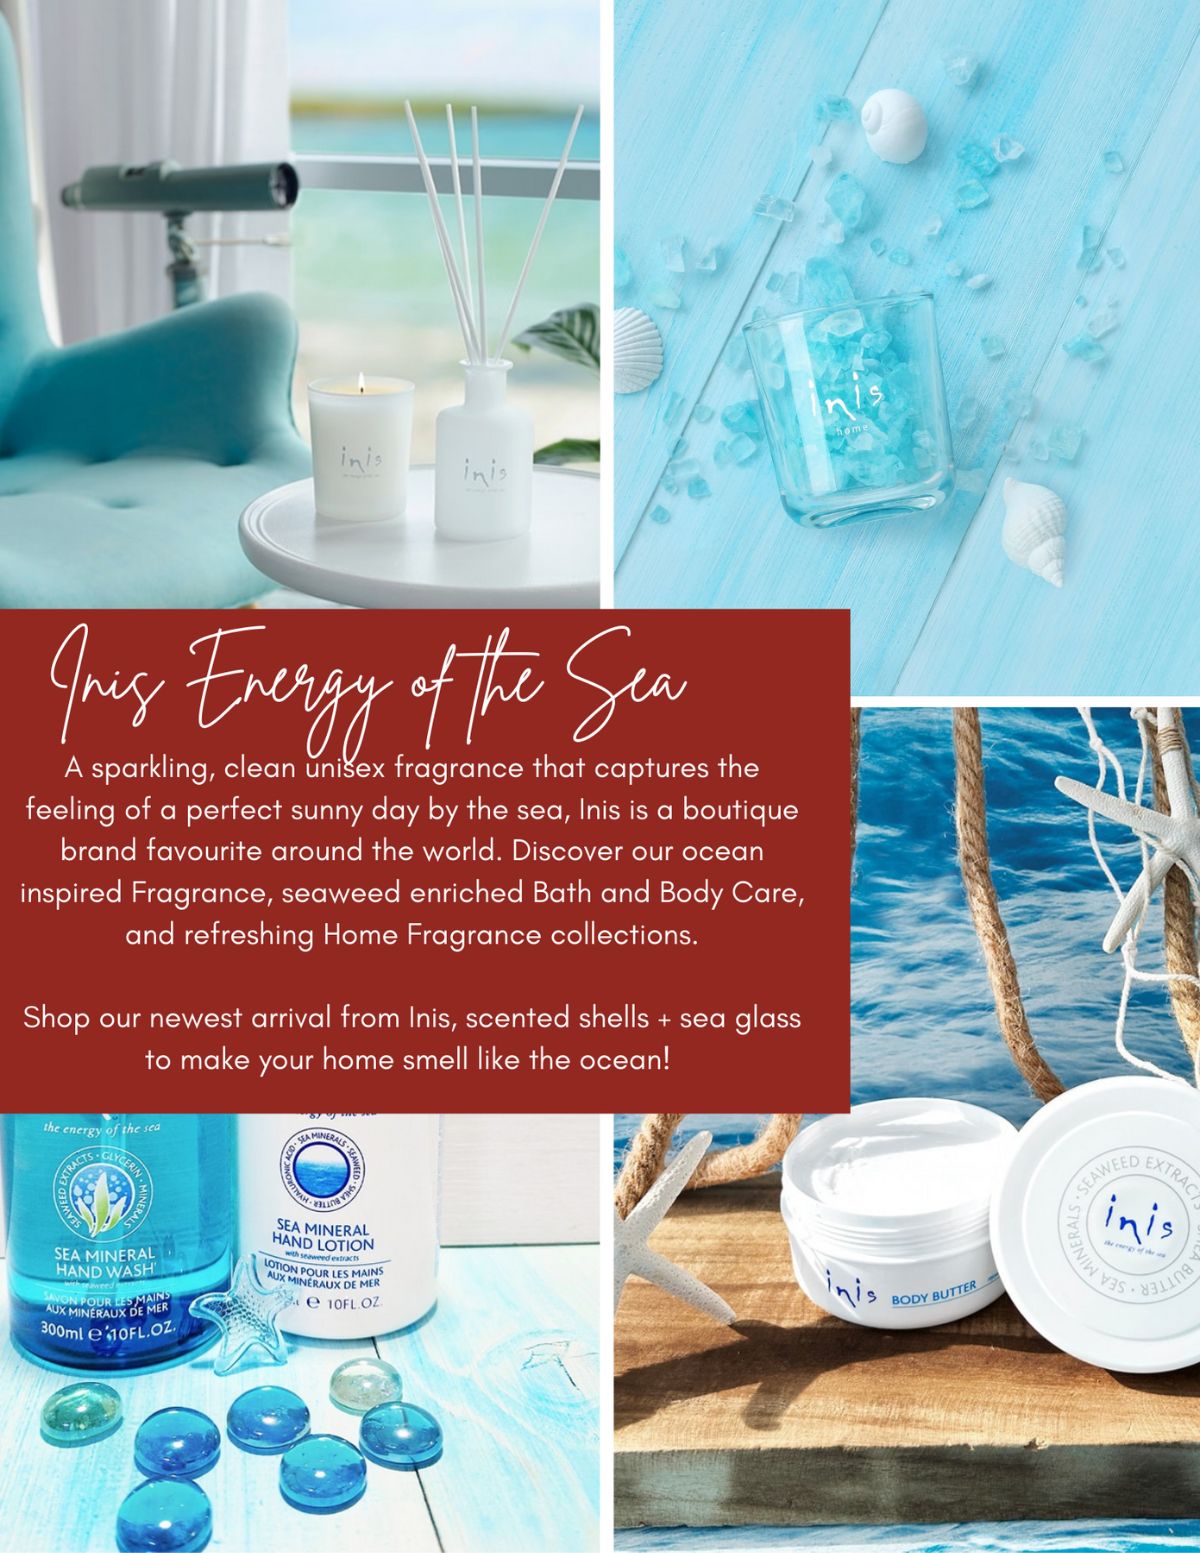 Inis Energy of the Sea at Willow Gift & Home